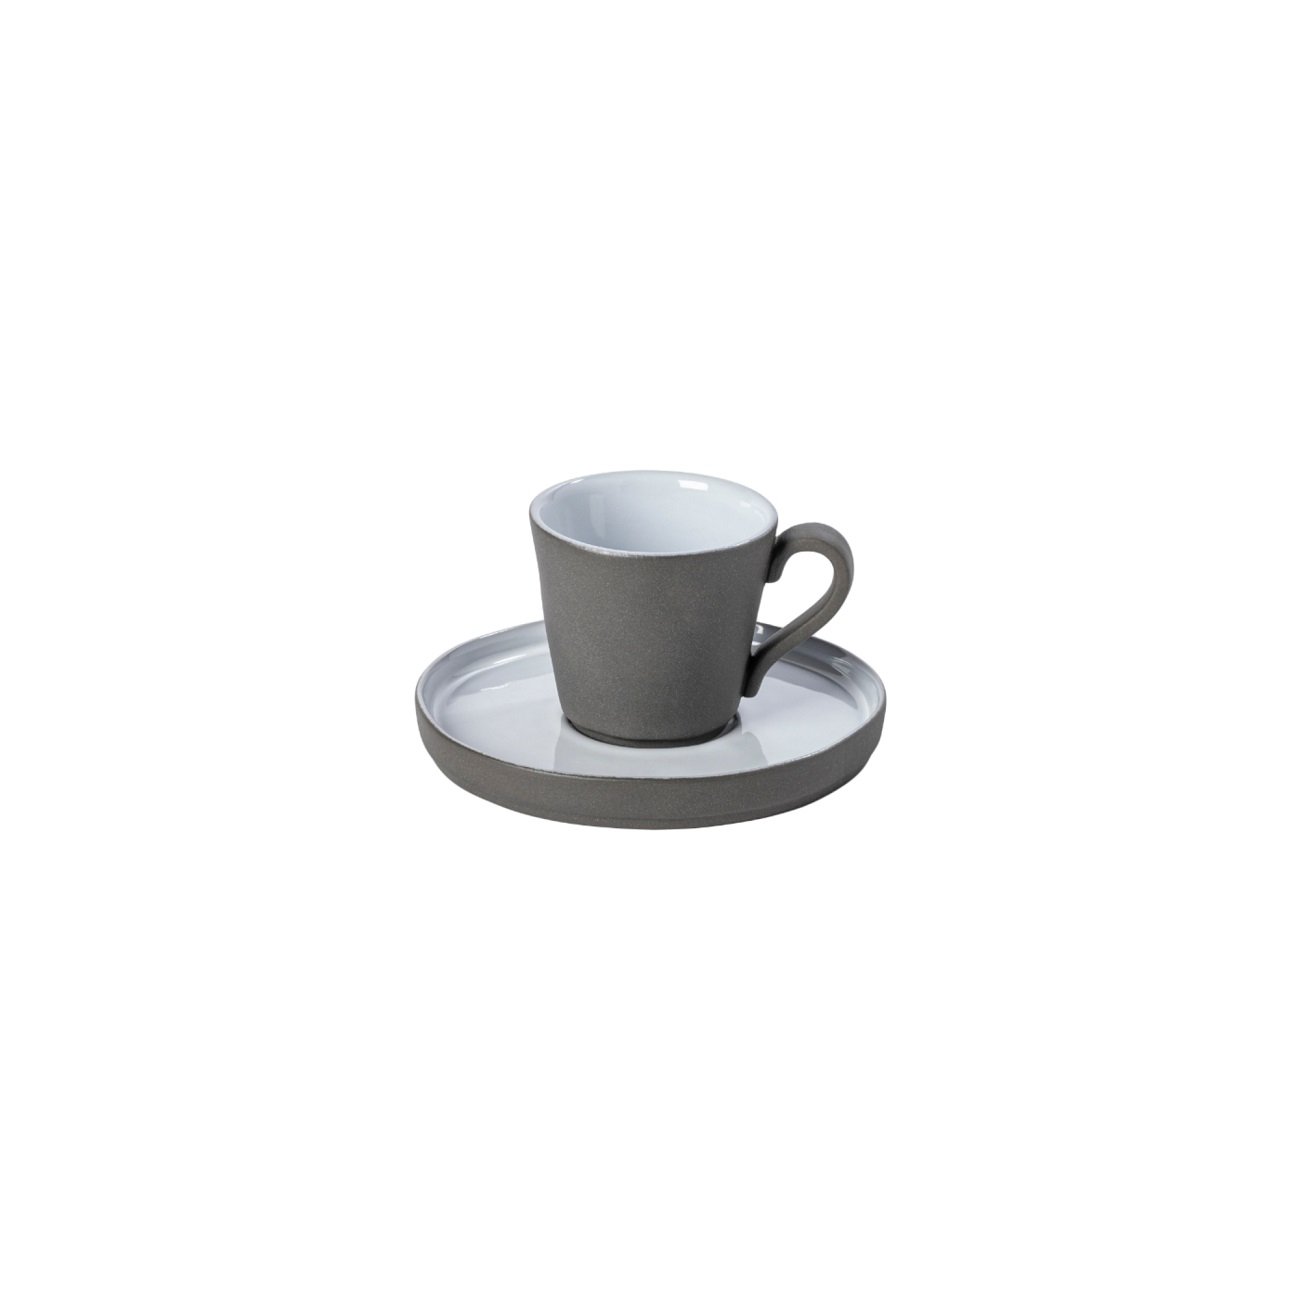 Lagoa Eco-gres White Coffee Cup & Saucer 0.09l Gift